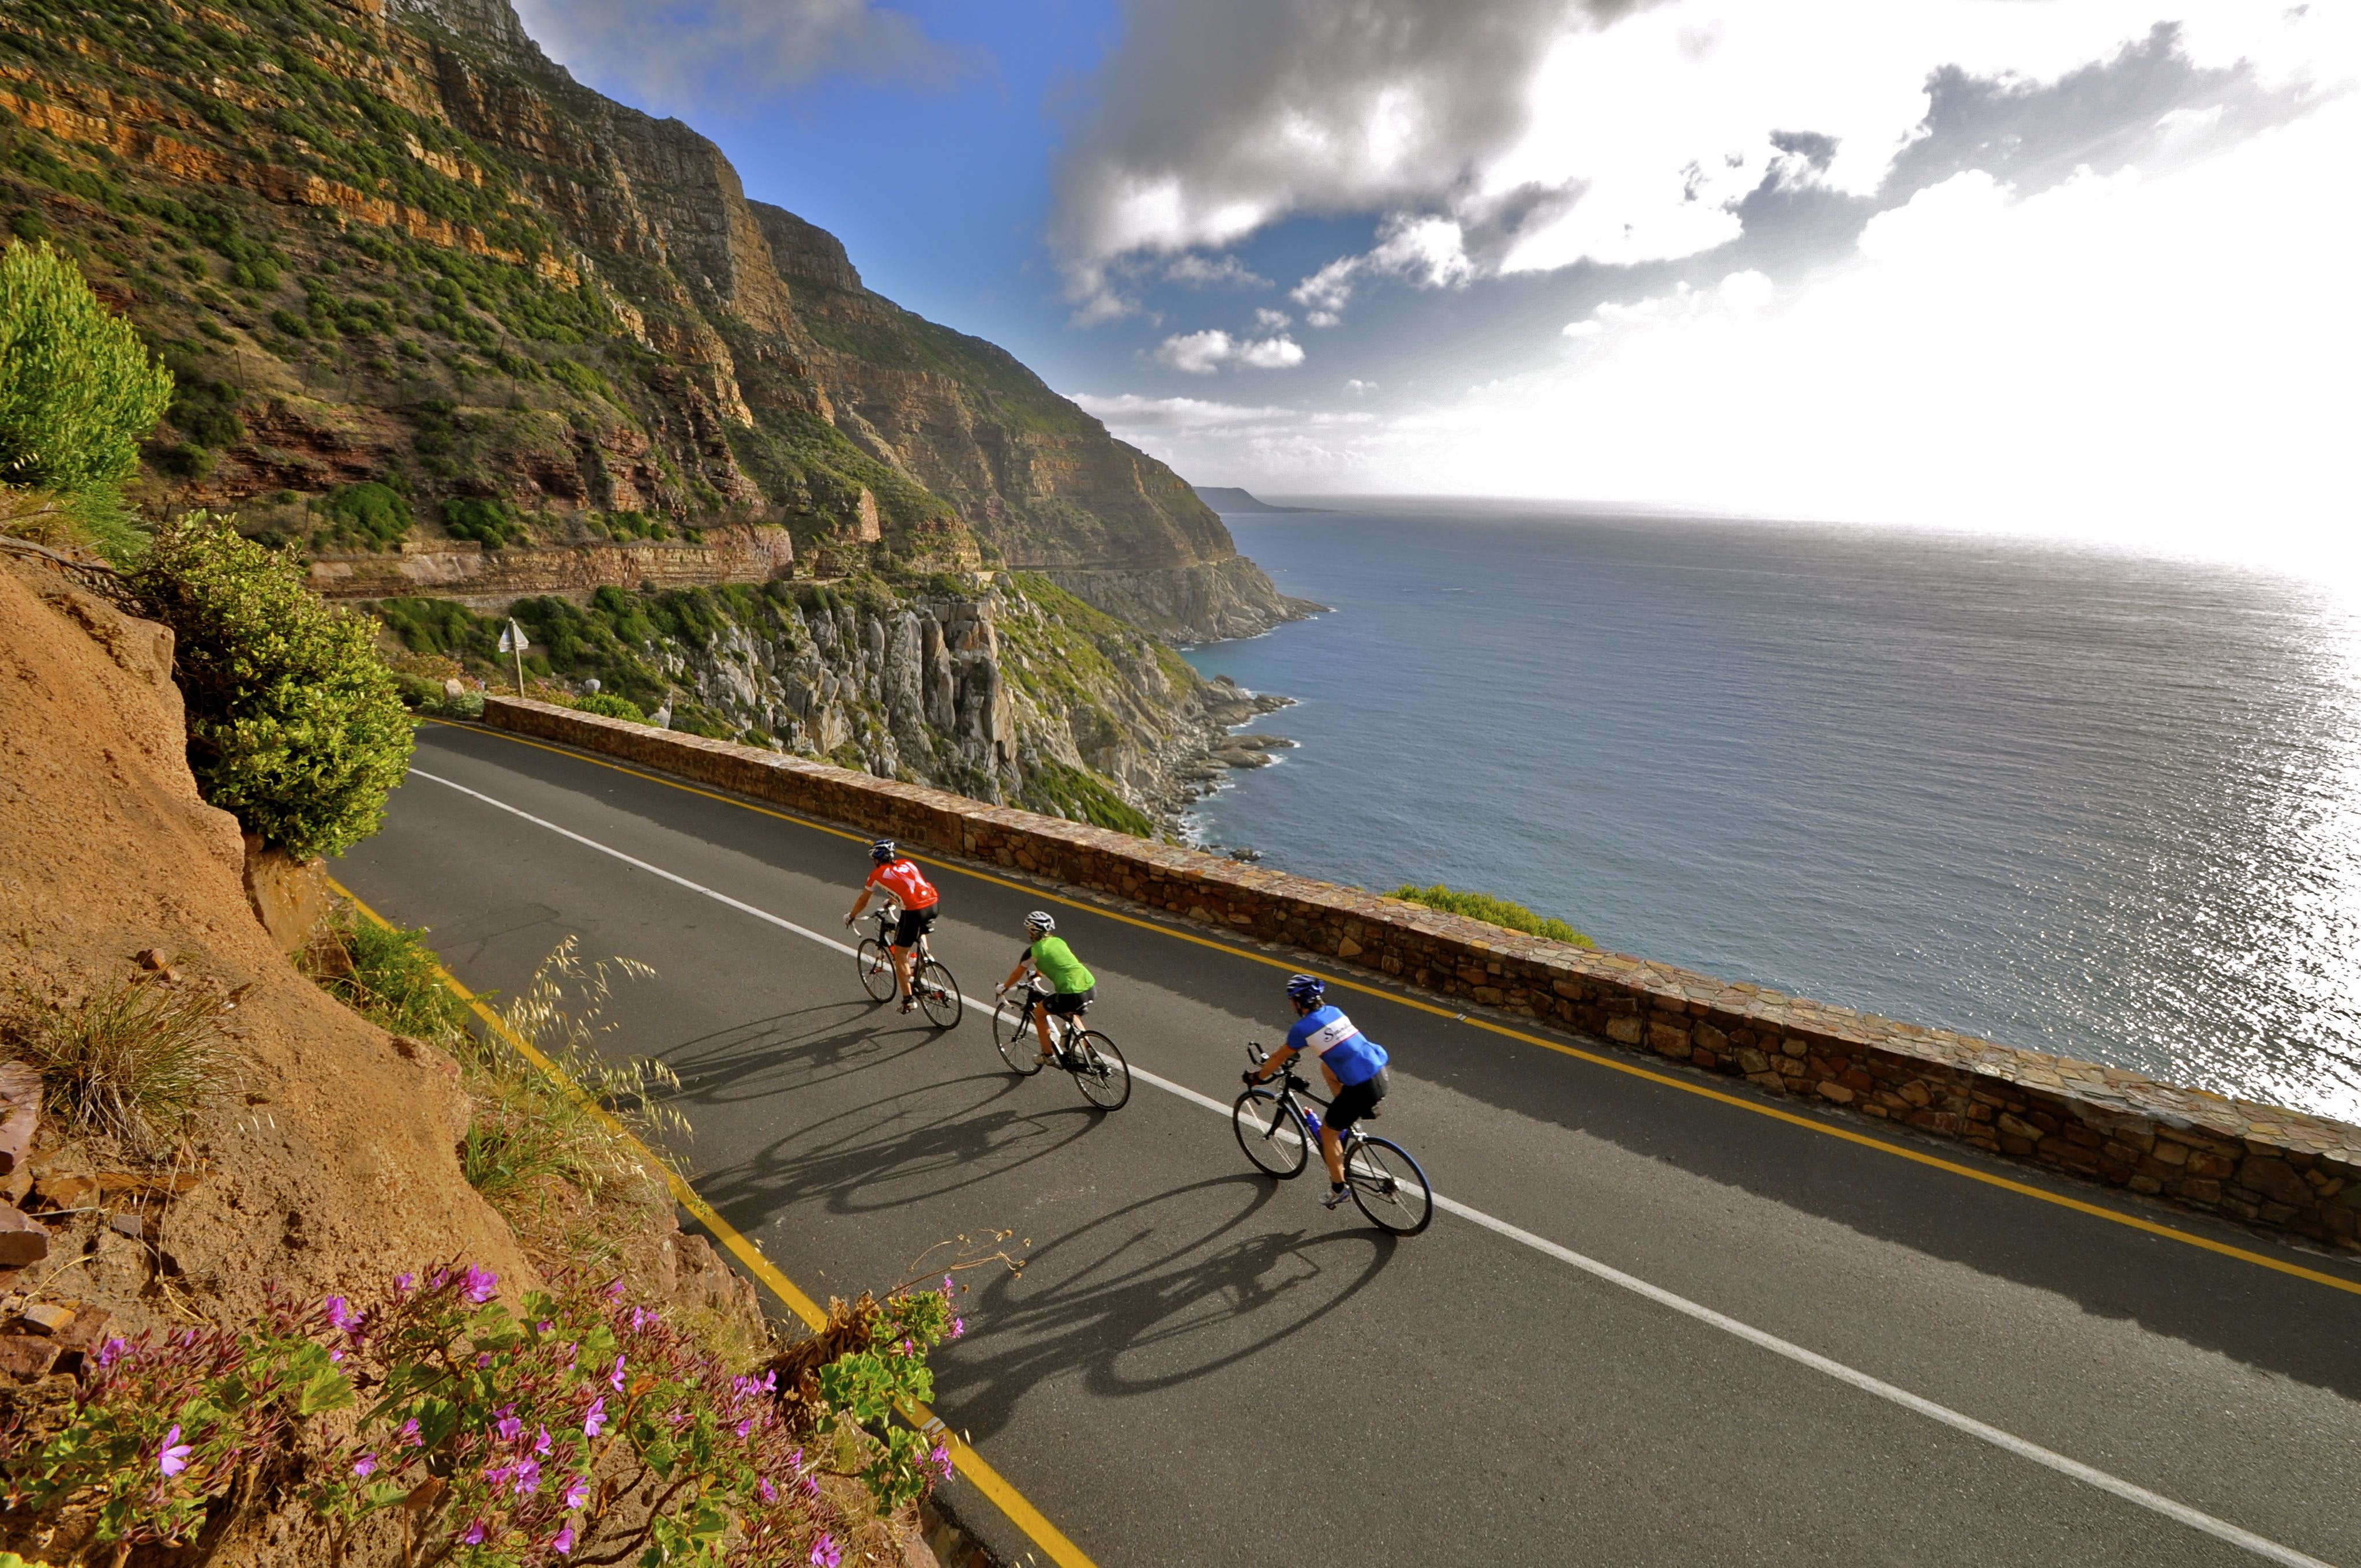 Cape Town, Chapmans Peak, clouds, Cycling, mountains, road